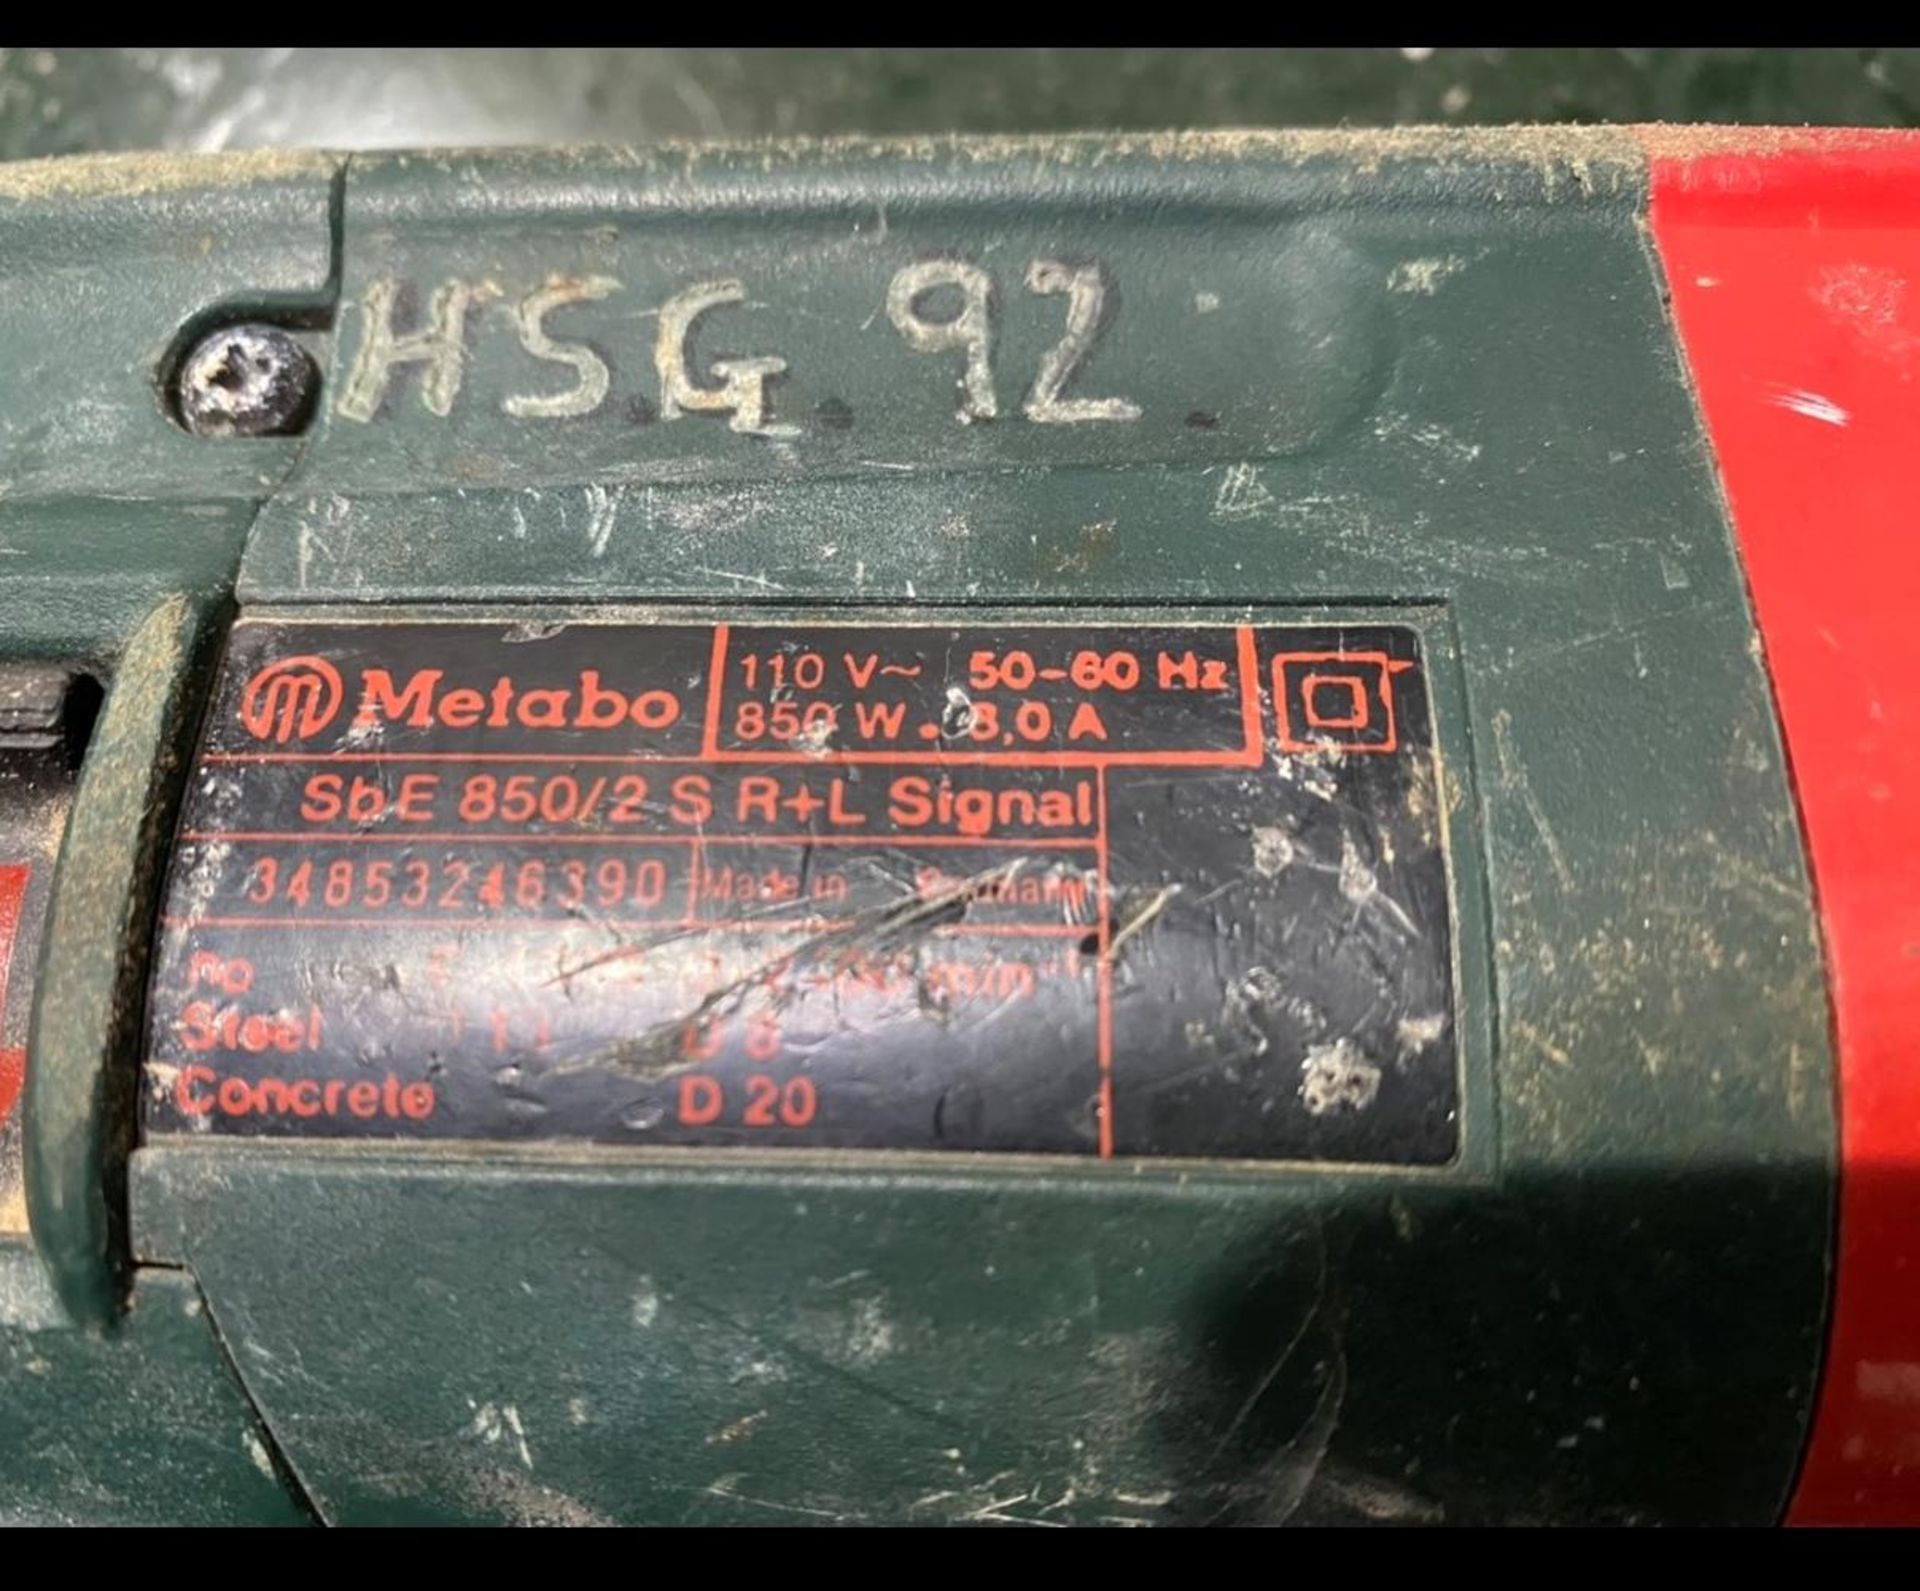 Metabo SBE850/2 Impact Drill 110v - Image 4 of 5